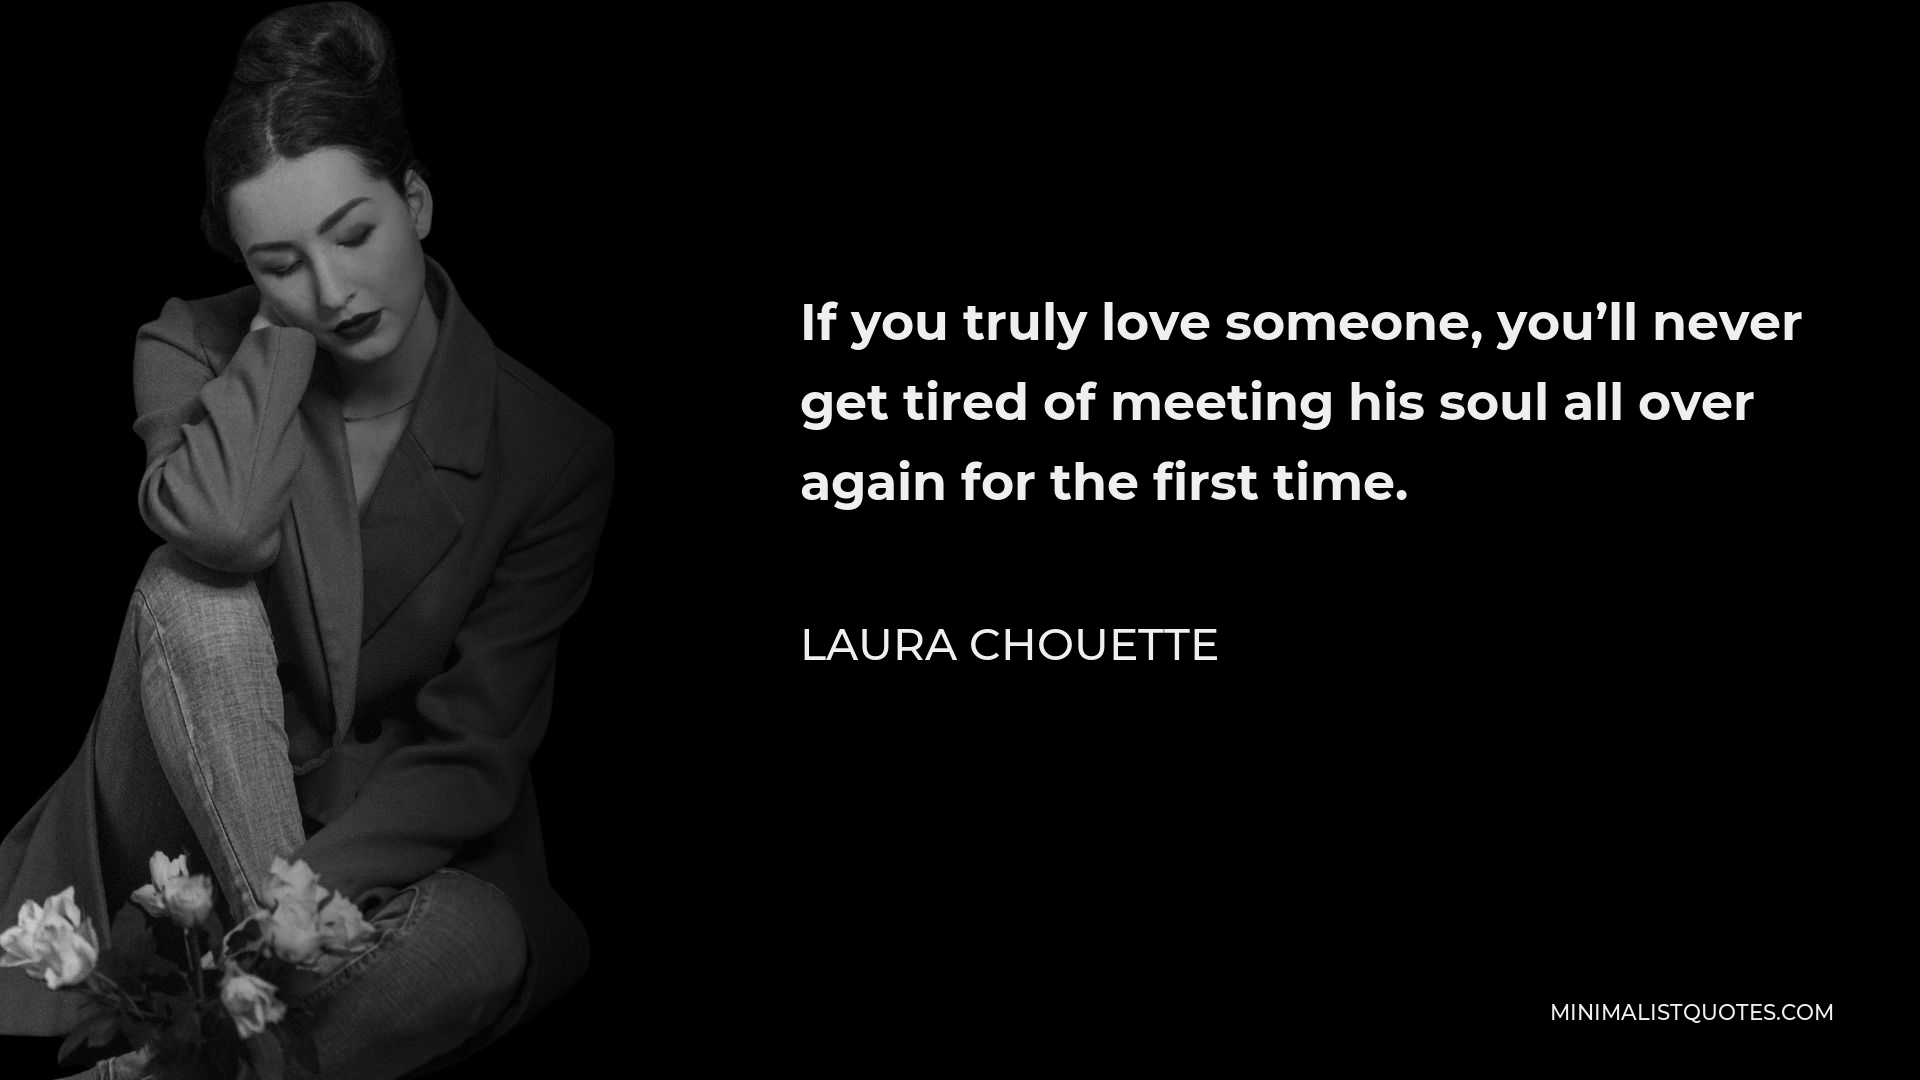 Laura Chouette Quote - If you truly love someone, you’ll never get tired of meeting his soul all over again for the first time.